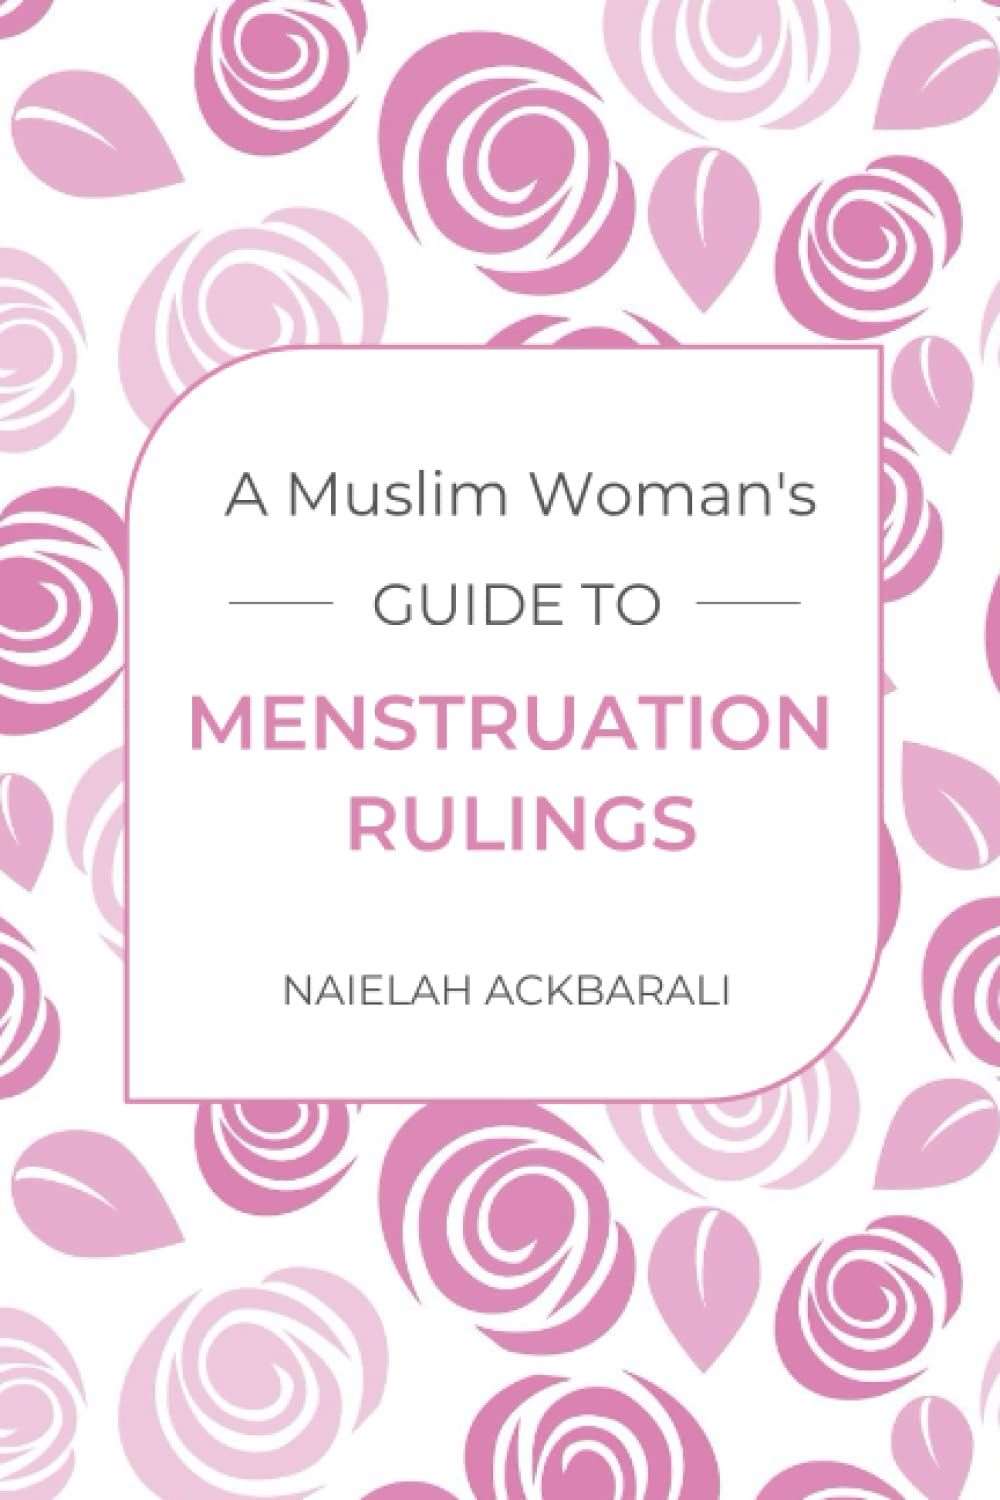 A Muslim Woman’s Guide to Menstruation Rulings